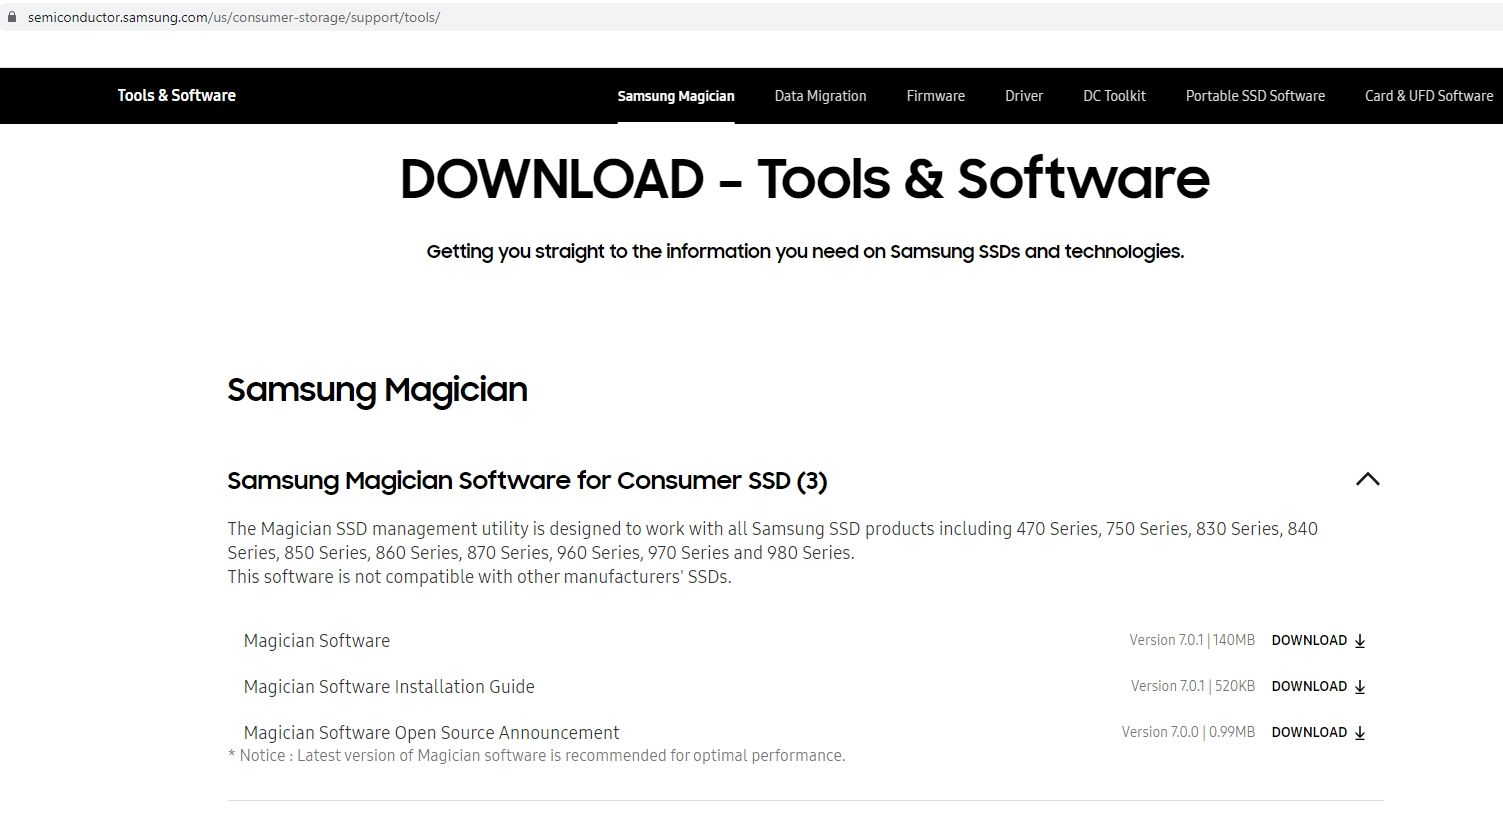 Samsung Magician version 7.1.0 update - Page 3 - Samsung Community